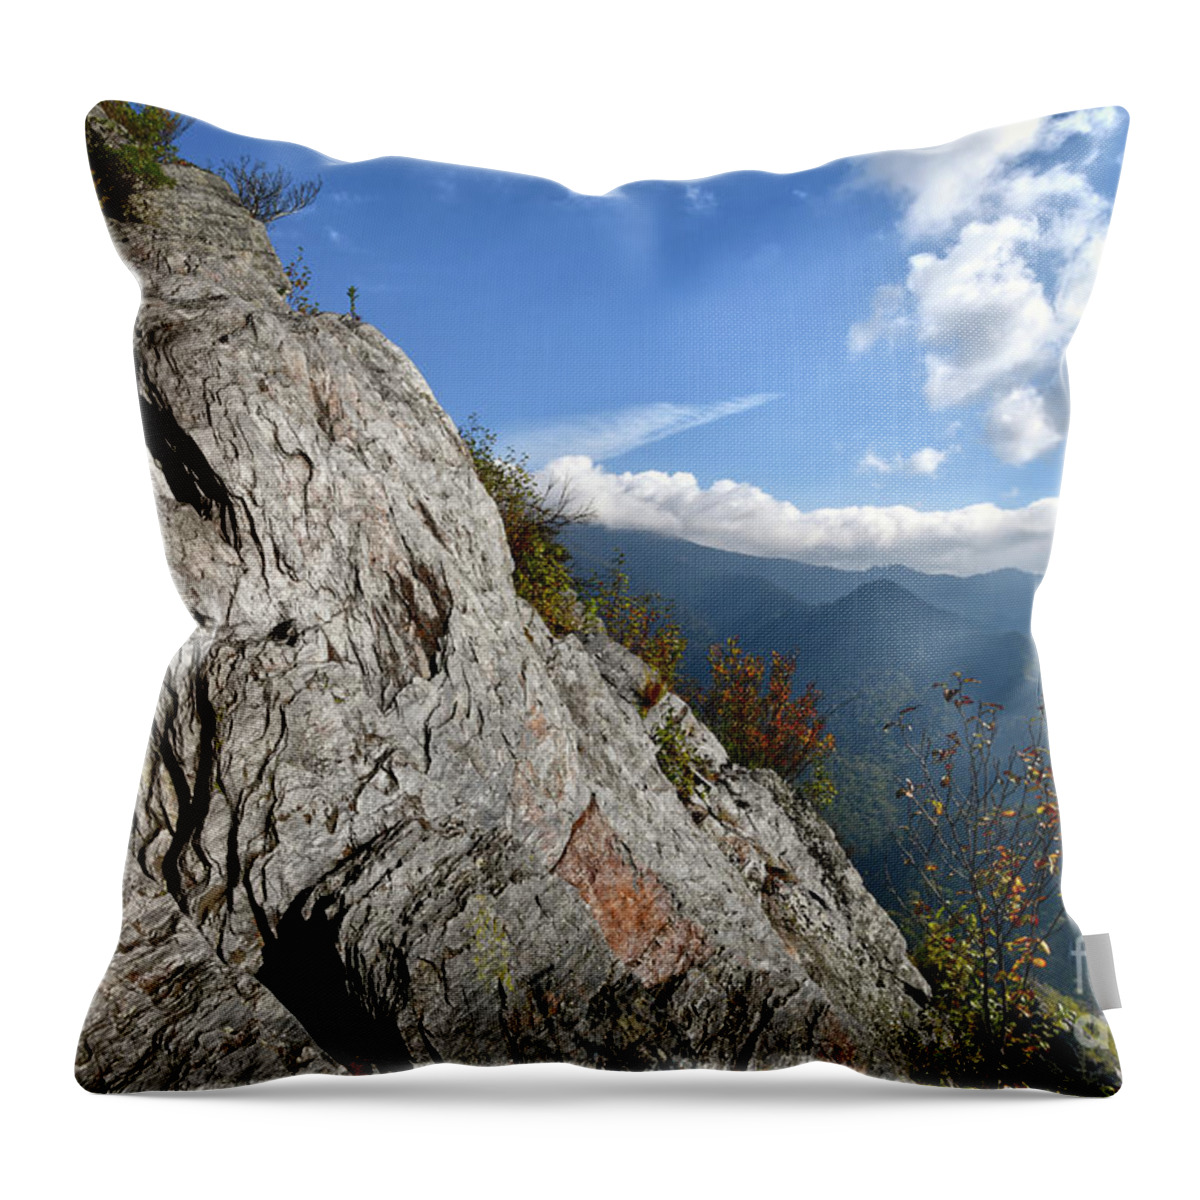 Chimney Tops Throw Pillow featuring the photograph Chimney Tops 14 by Phil Perkins